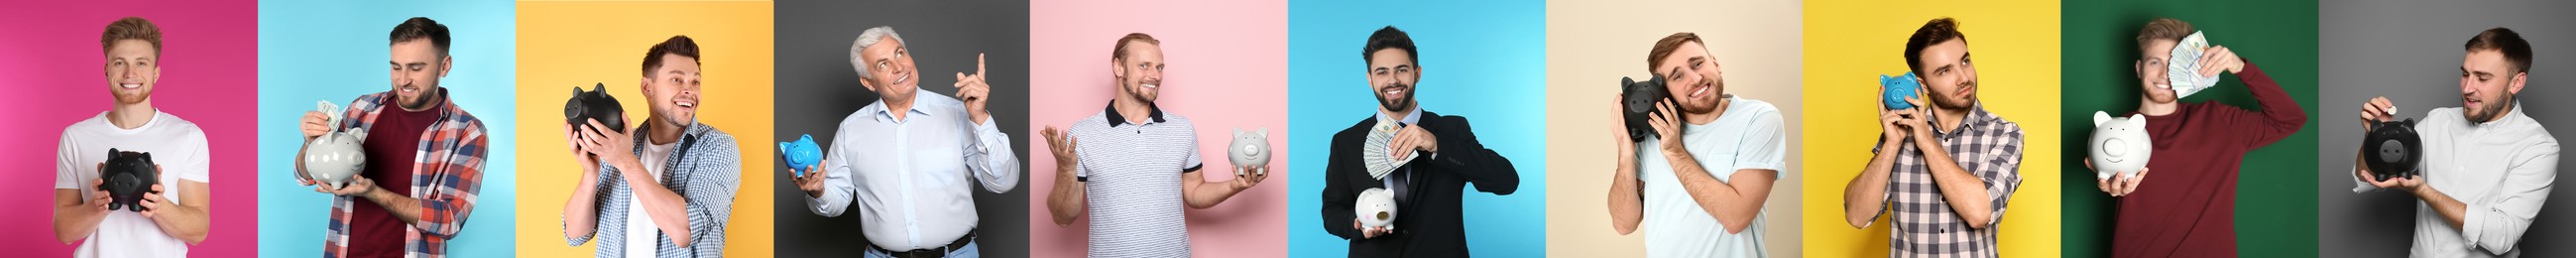 Image of Collage with photos of men holding piggy banks on different color backgrounds. Banner design